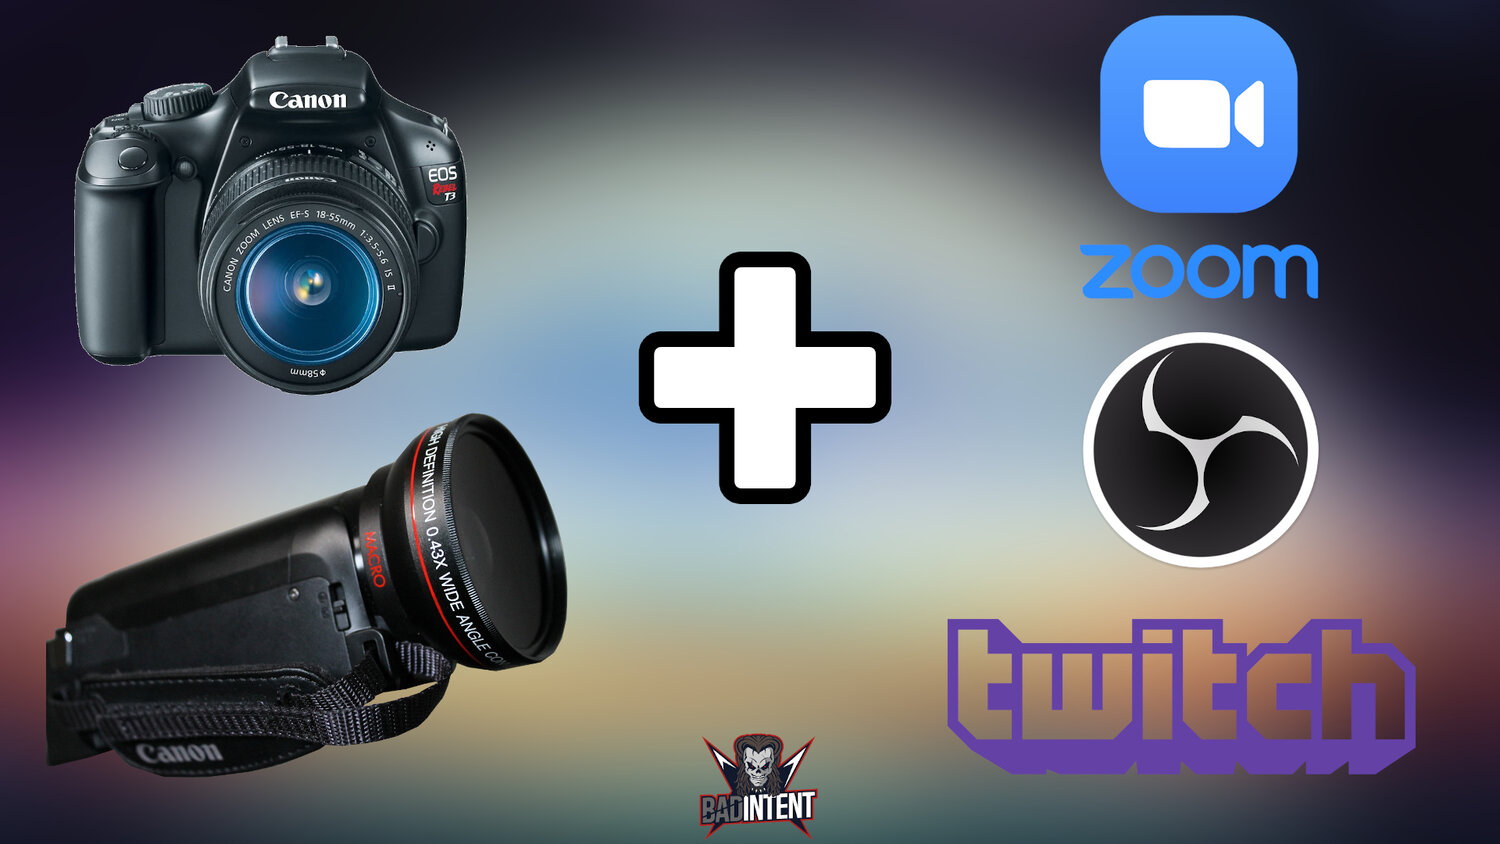 Lot Opschudding Kindercentrum How to use a DSLR or Camcorder as a Webcam in OBS, Zoom, and more. [Step by  step guide] — Stream Tech Reviews by BadIntent